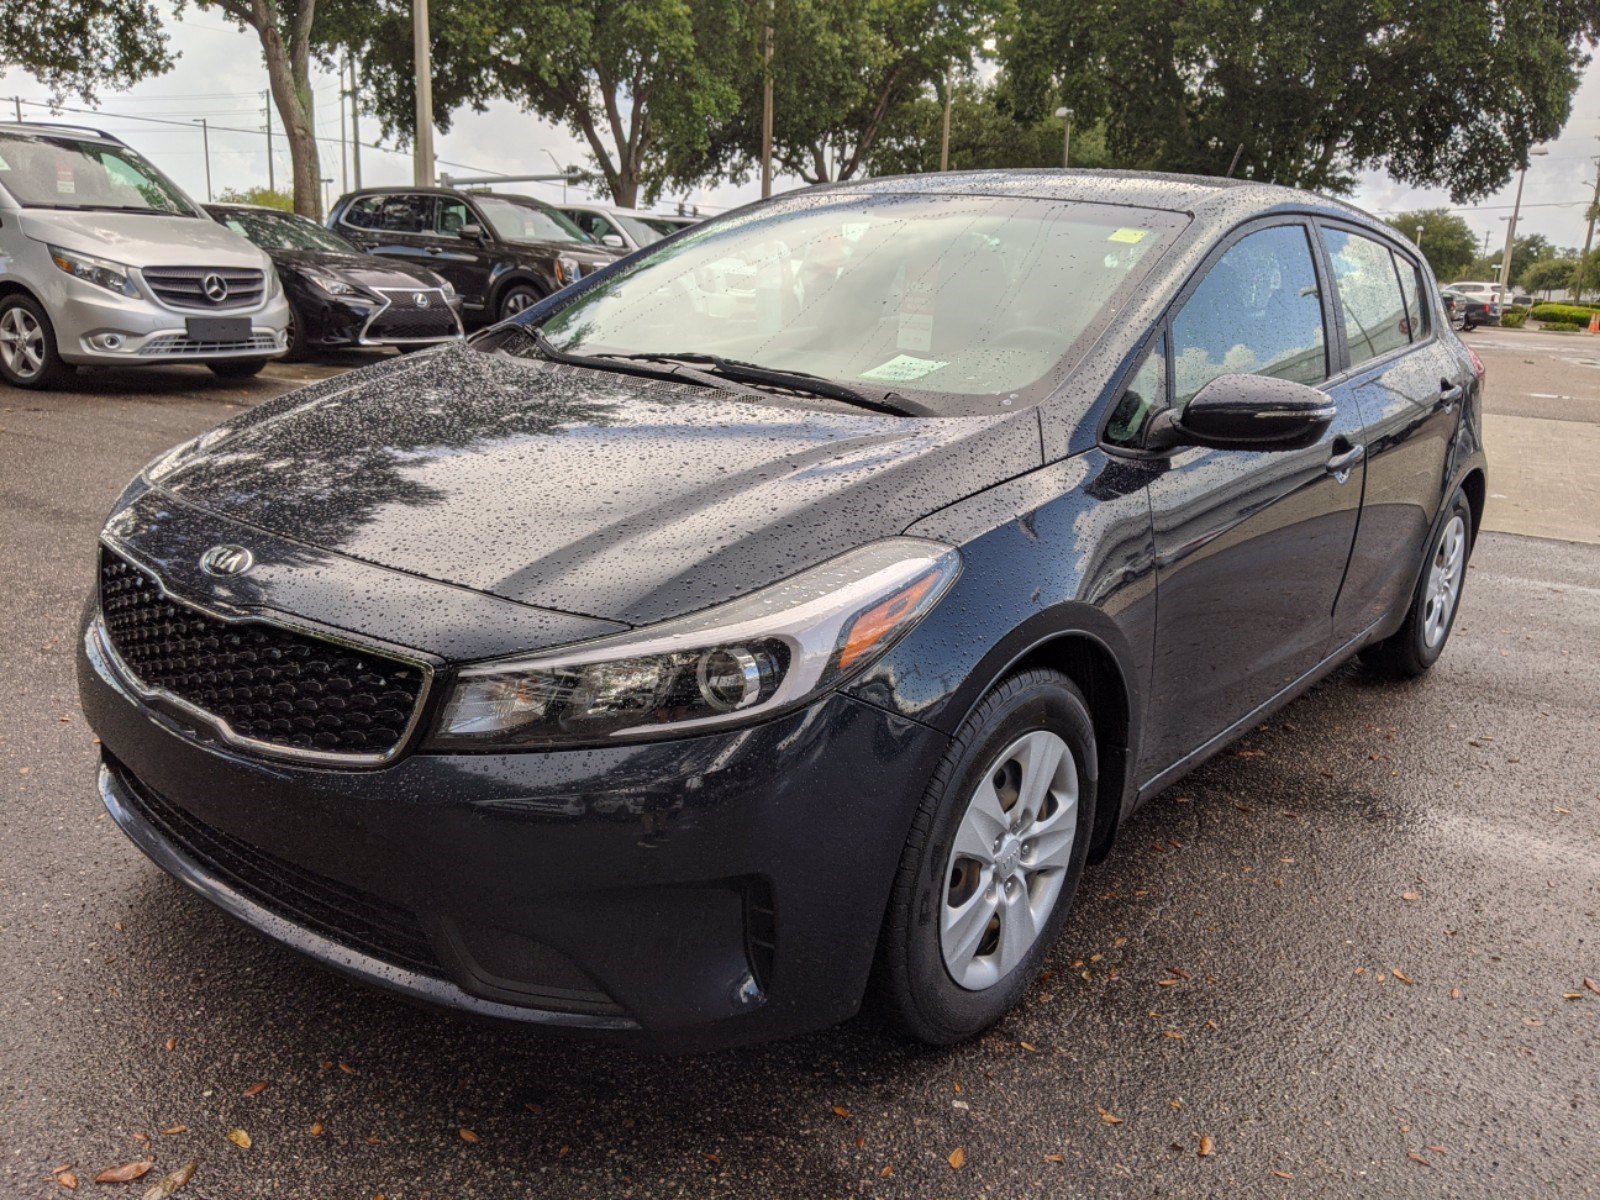 Pre-Owned 2017 Kia Forte5 LX FWD Hatchback